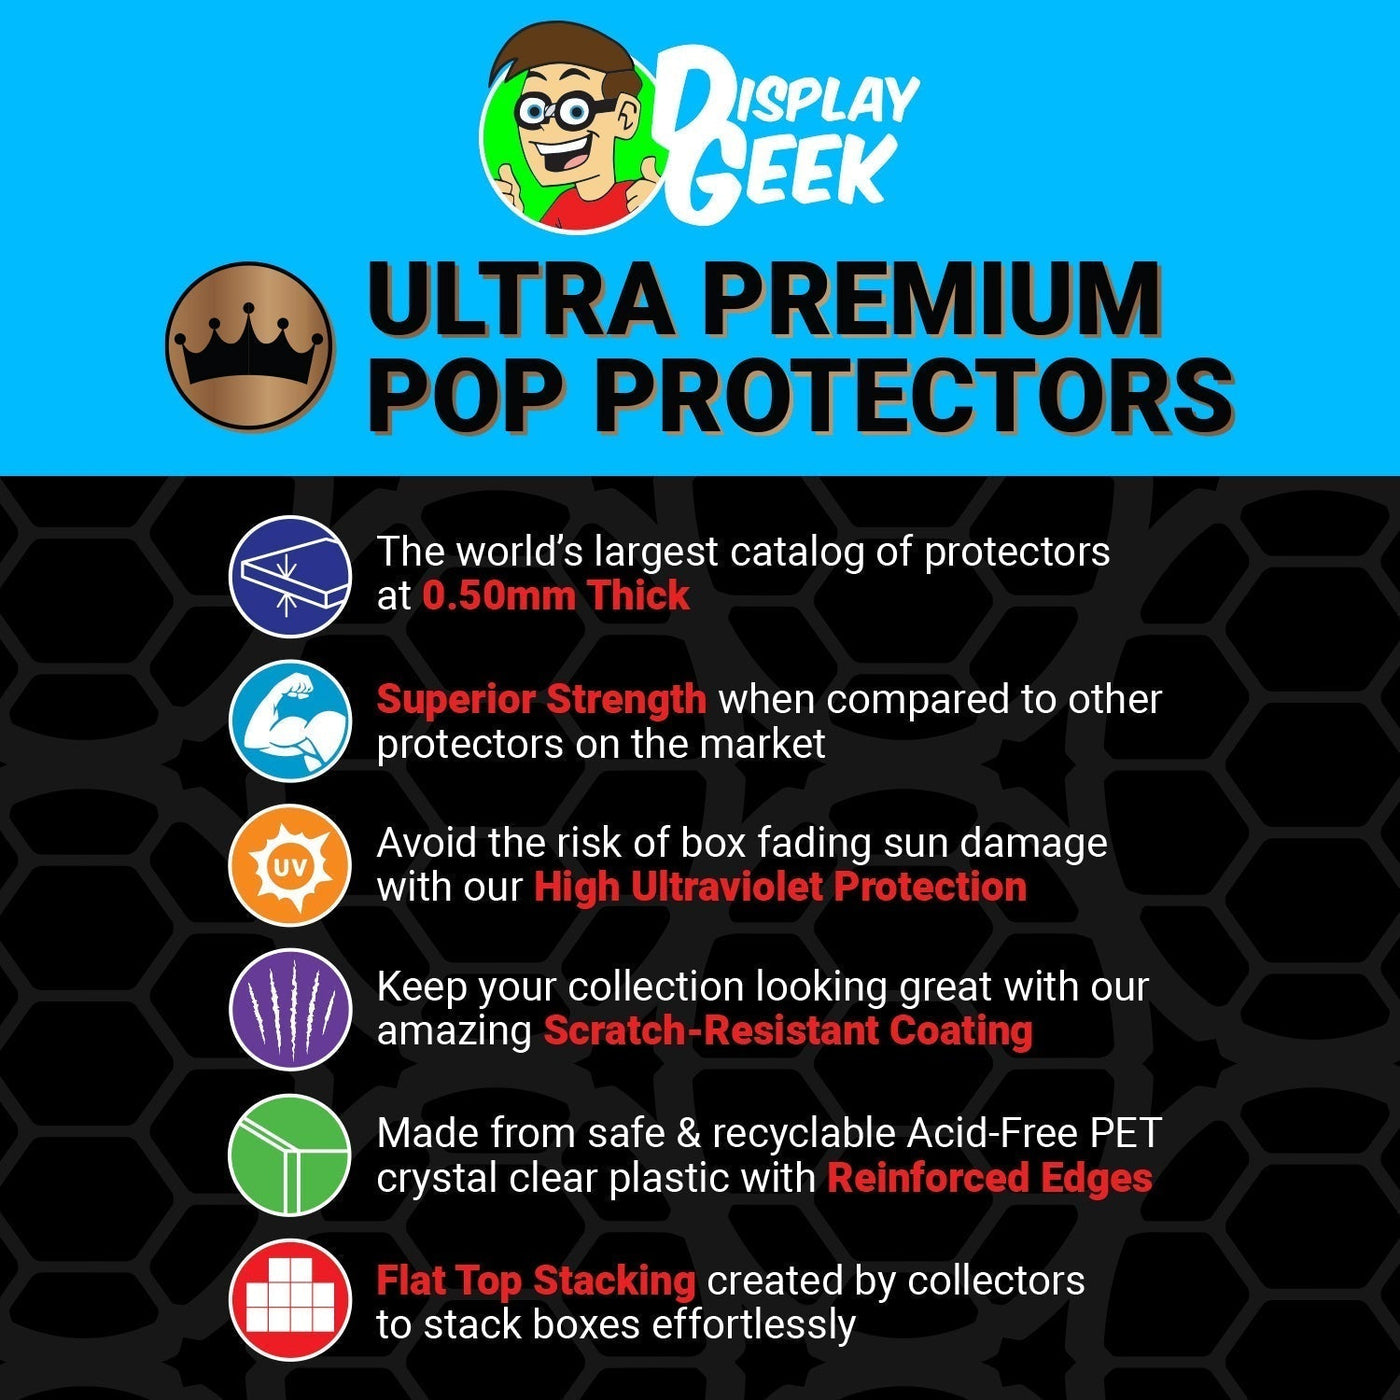 Pop Protector for Skeletor D-Con FunkO's Cereal Box on The Protector Guide App by Display Geek